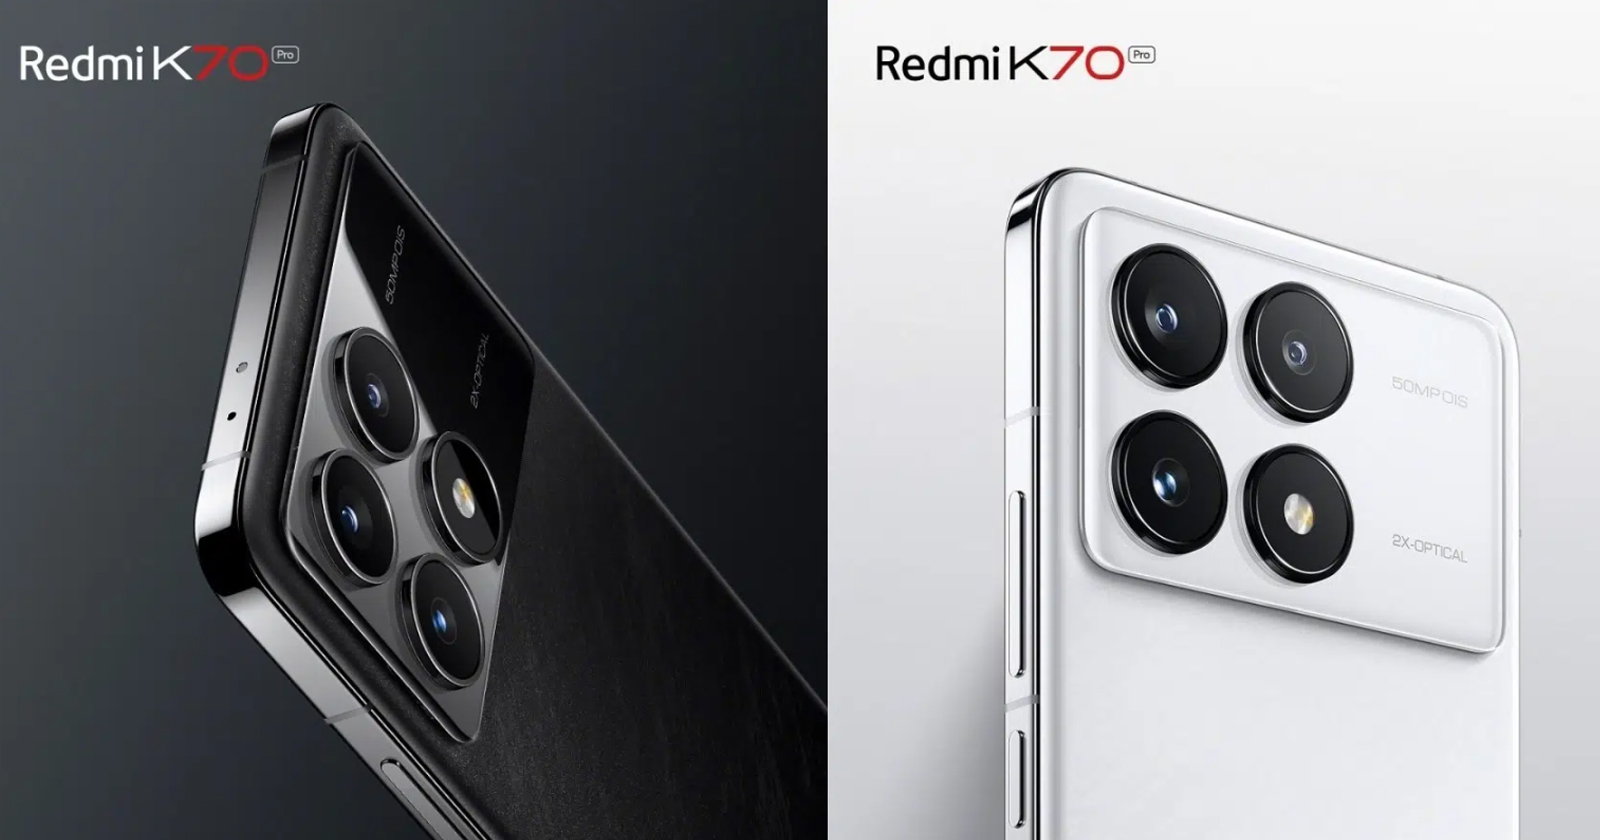 Live images of Redmi K70 and K70 Pro have emerged! Here are all the details